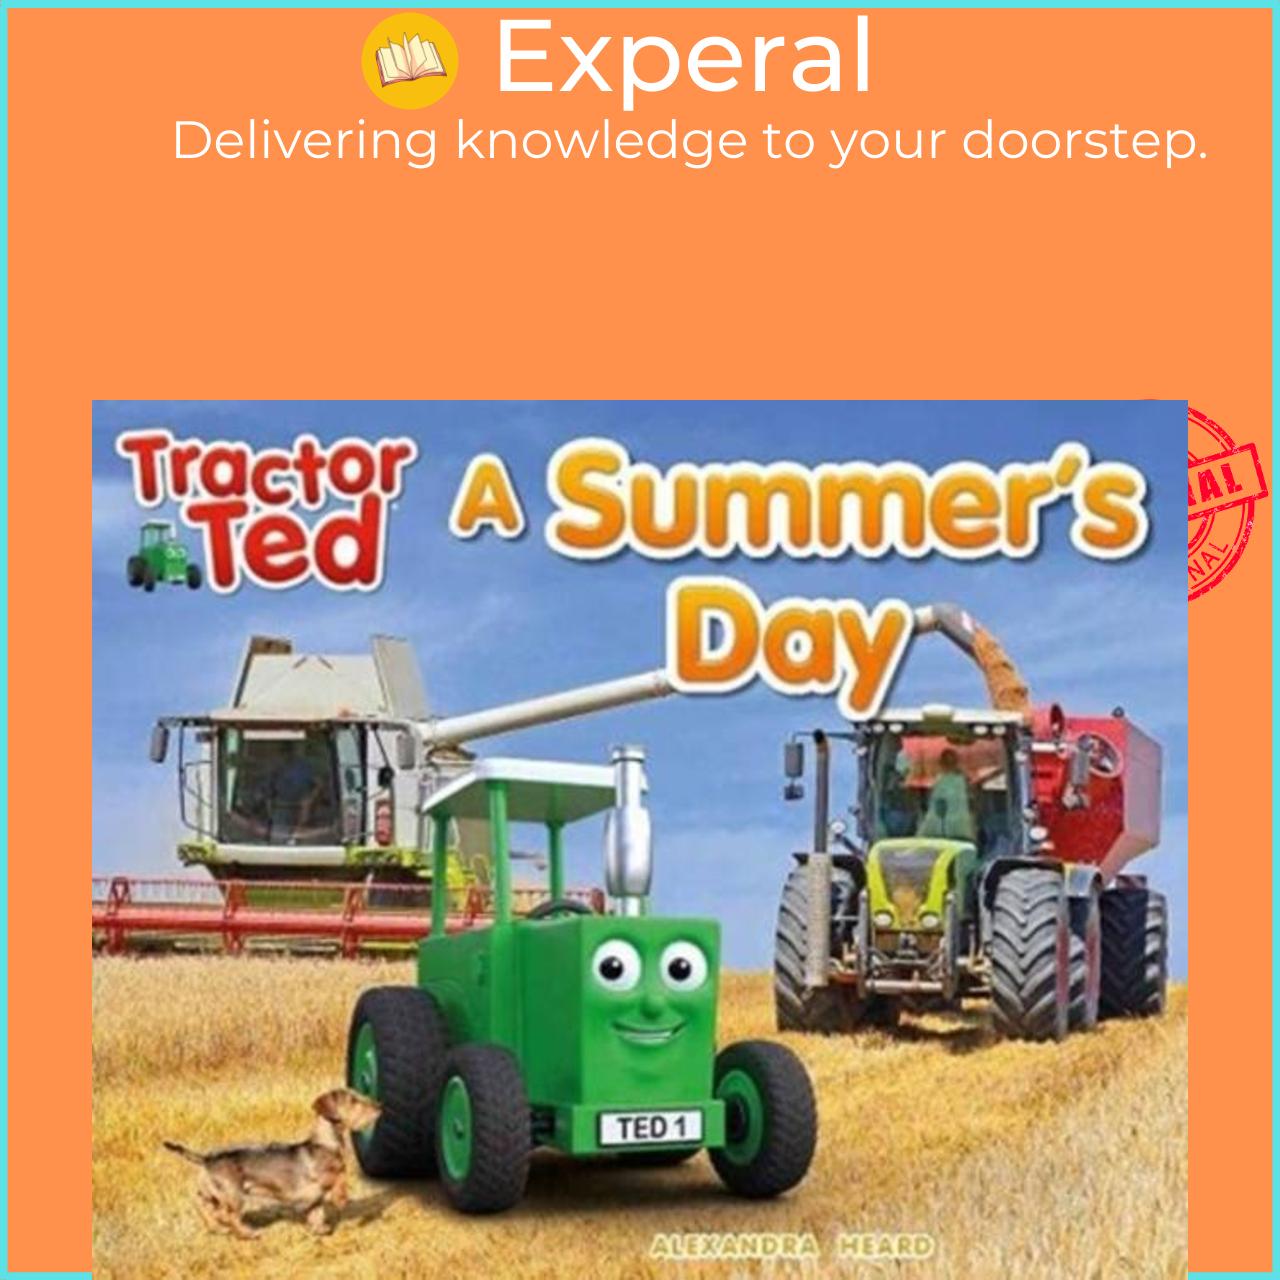 Hình ảnh Sách - Tractor Ted A Summer's Day by alexandra heard (UK edition, paperback)